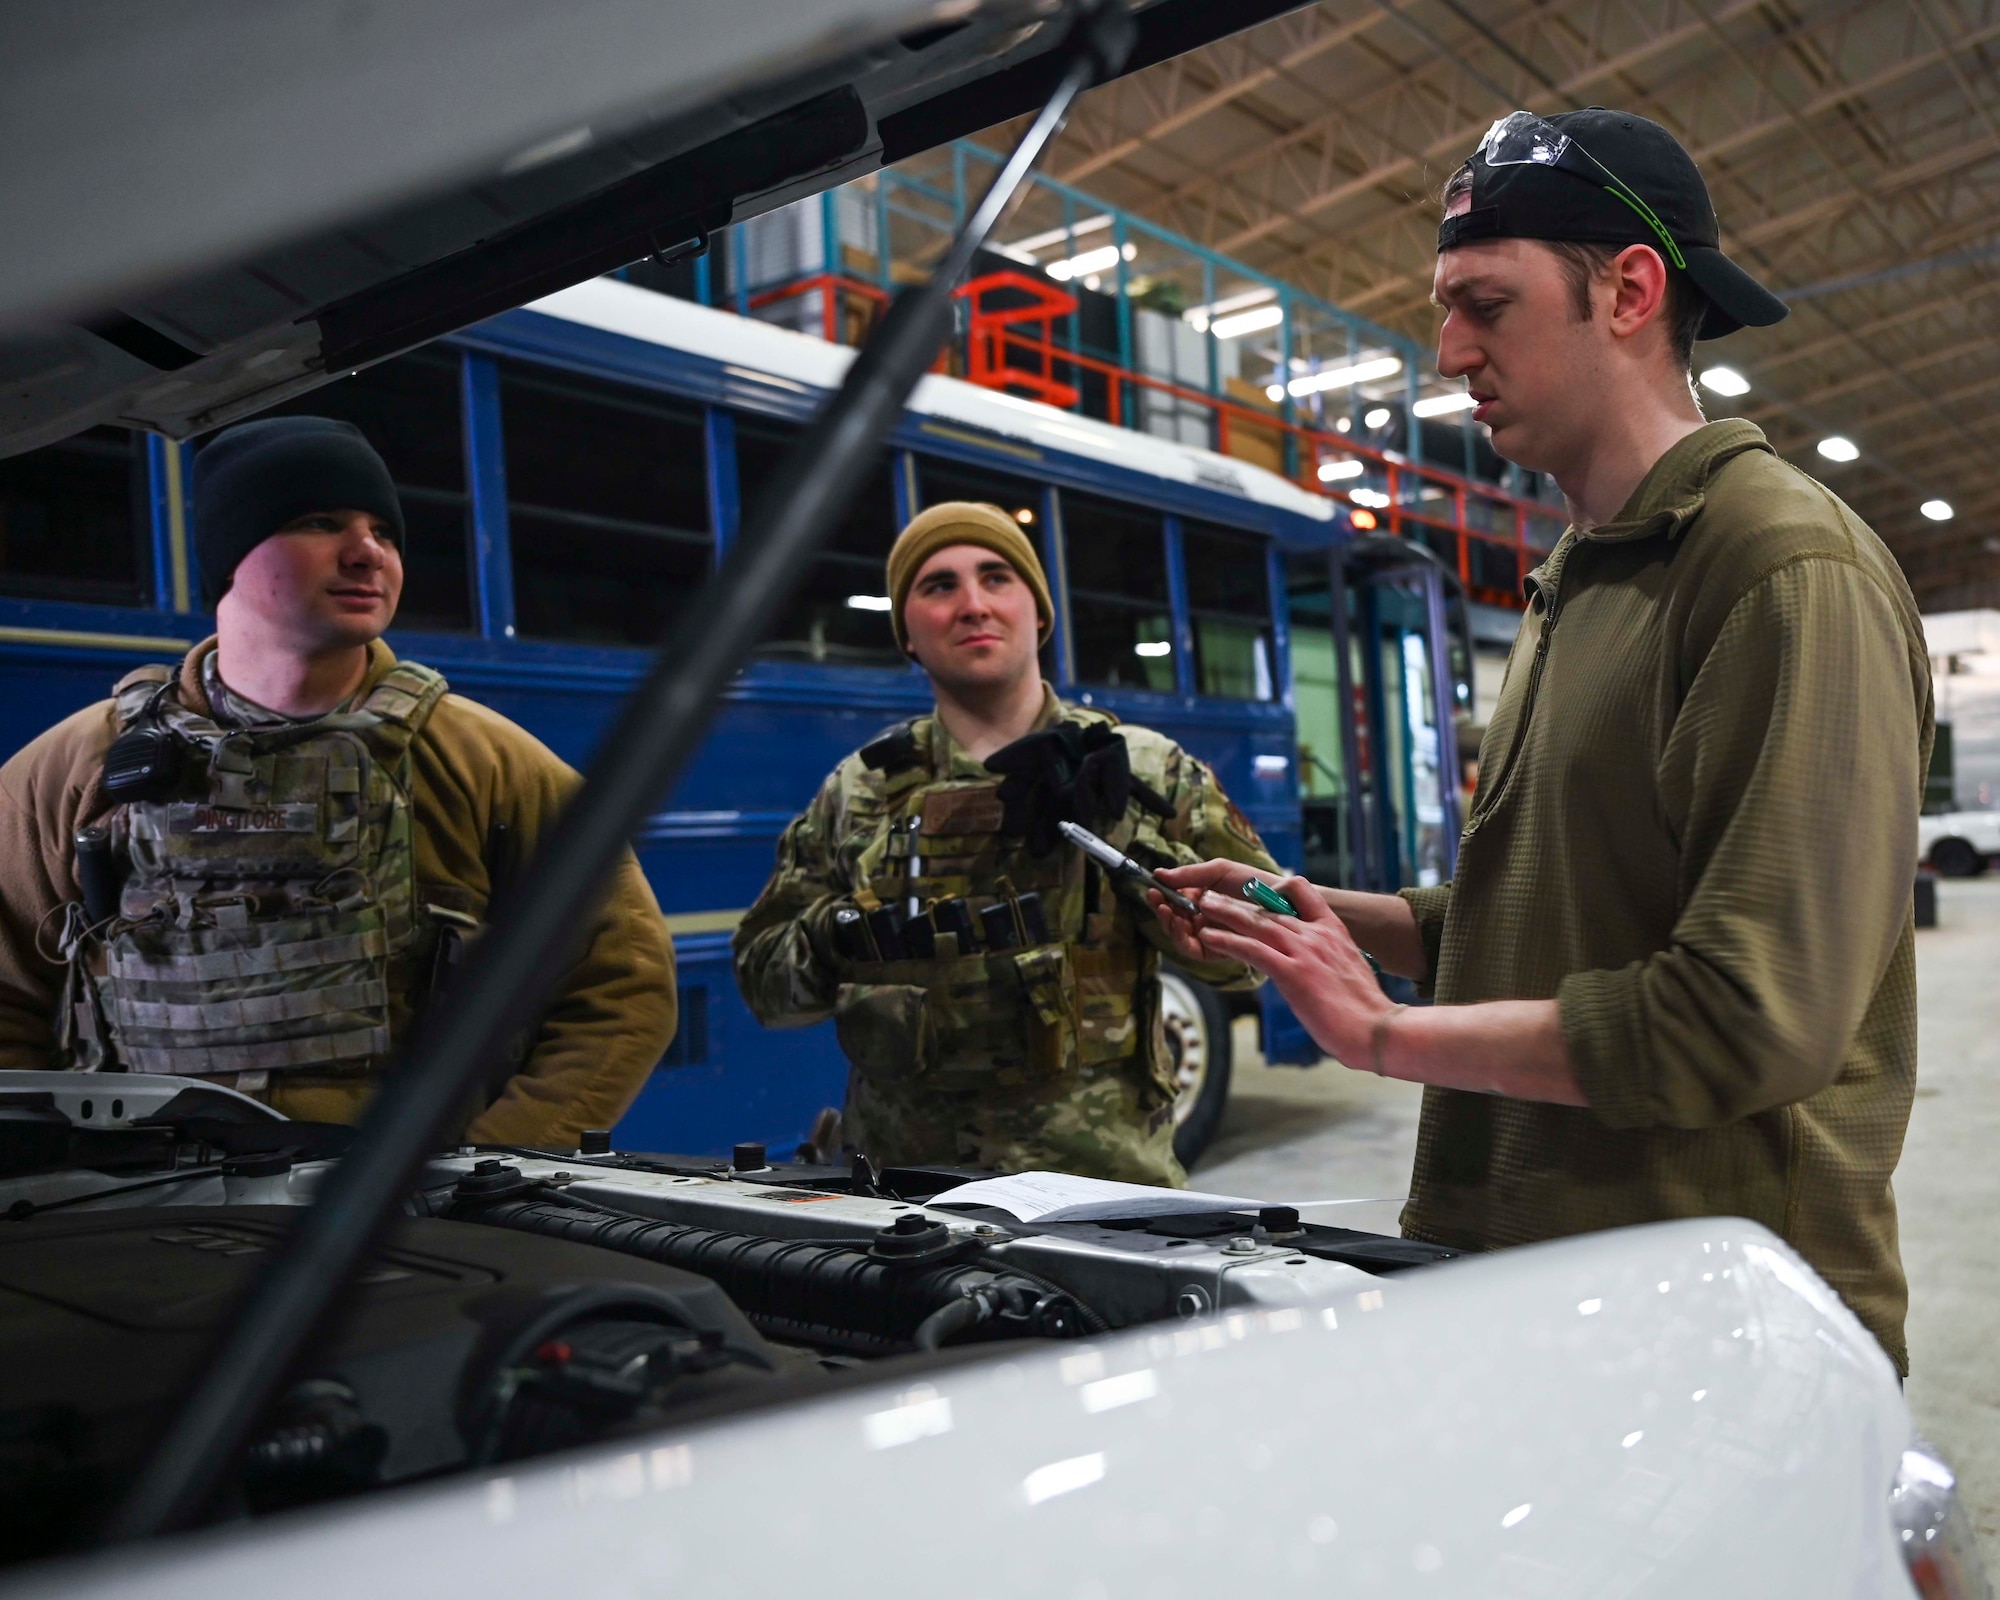 U.S. Air Force Senior Airman Dylan Colt, 100th Logistics Readiness Squadron vehicle maintenance journeyman (right), Airman 1st Class Cameron French, 100th Security Forces response member (left), and Senior Airman Michael Pingitore (middle), base defense operations center controller, discuss a headlight system defect on a security forces patrol vehicle assigned to the 100th LRS, Royal Air Force Mildenhall, England, Feb. 2, 2022. In order to keep patrol vehicles mission-ready, a functioning headlight system is necessary to  challenge a speeding or suspicious driver. (U.S. Air Force photo by Airman 1st Class Viviam Chiu)